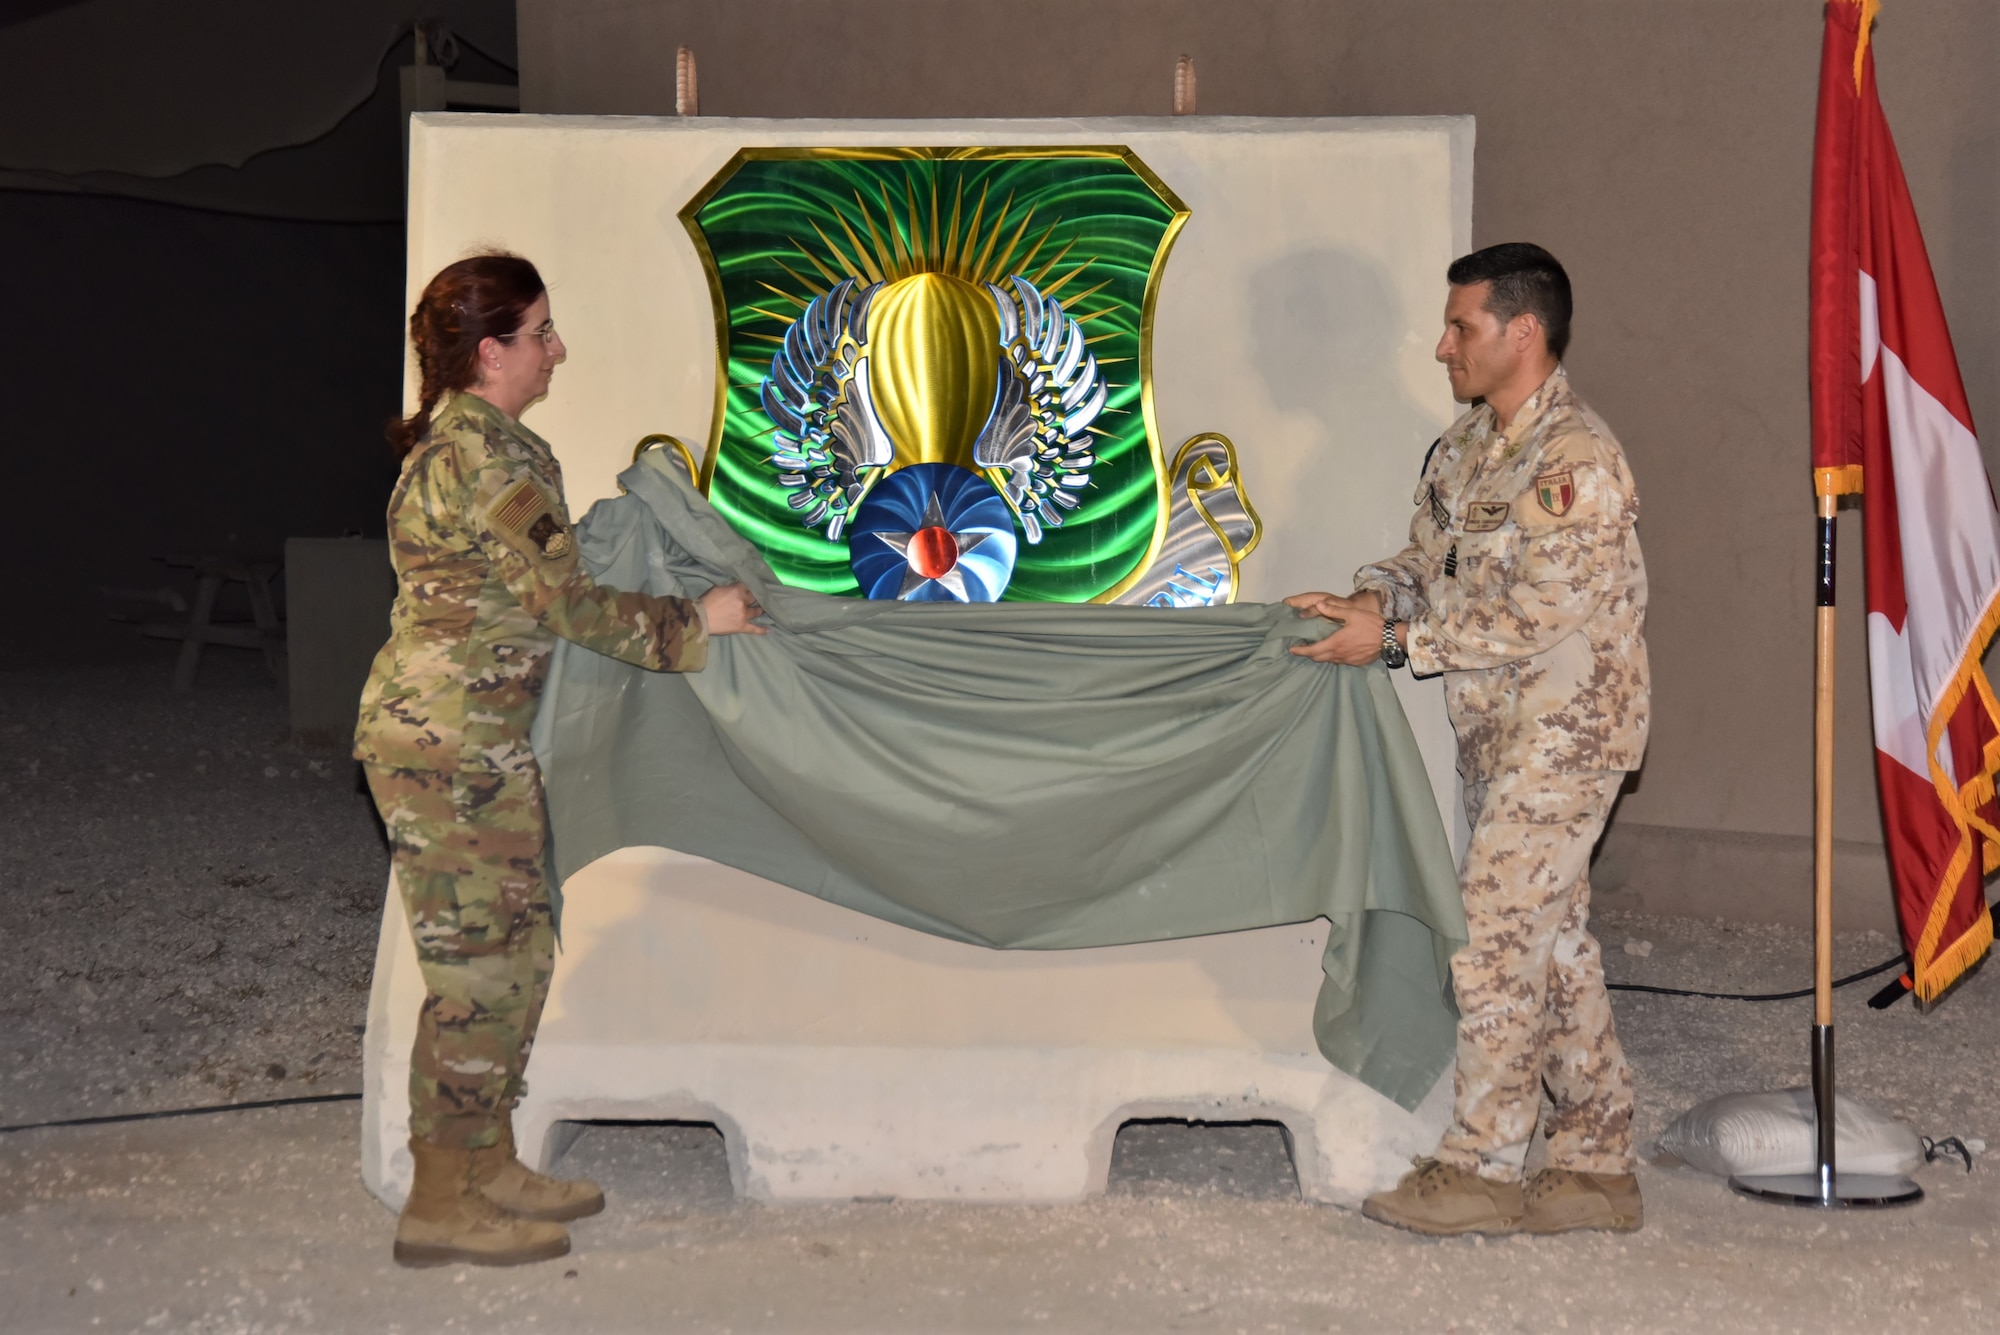 U.S. Air Force Col. Julie Sposito-Salceies, 609th Air Operations Center commander, left, and Italian Air Force Col. Emilio Fanigliulo, lead senior national representative, unveil the new coalition and combined forces central emblem August 16, 2023, at Al Udeid Air Base, Qatar.